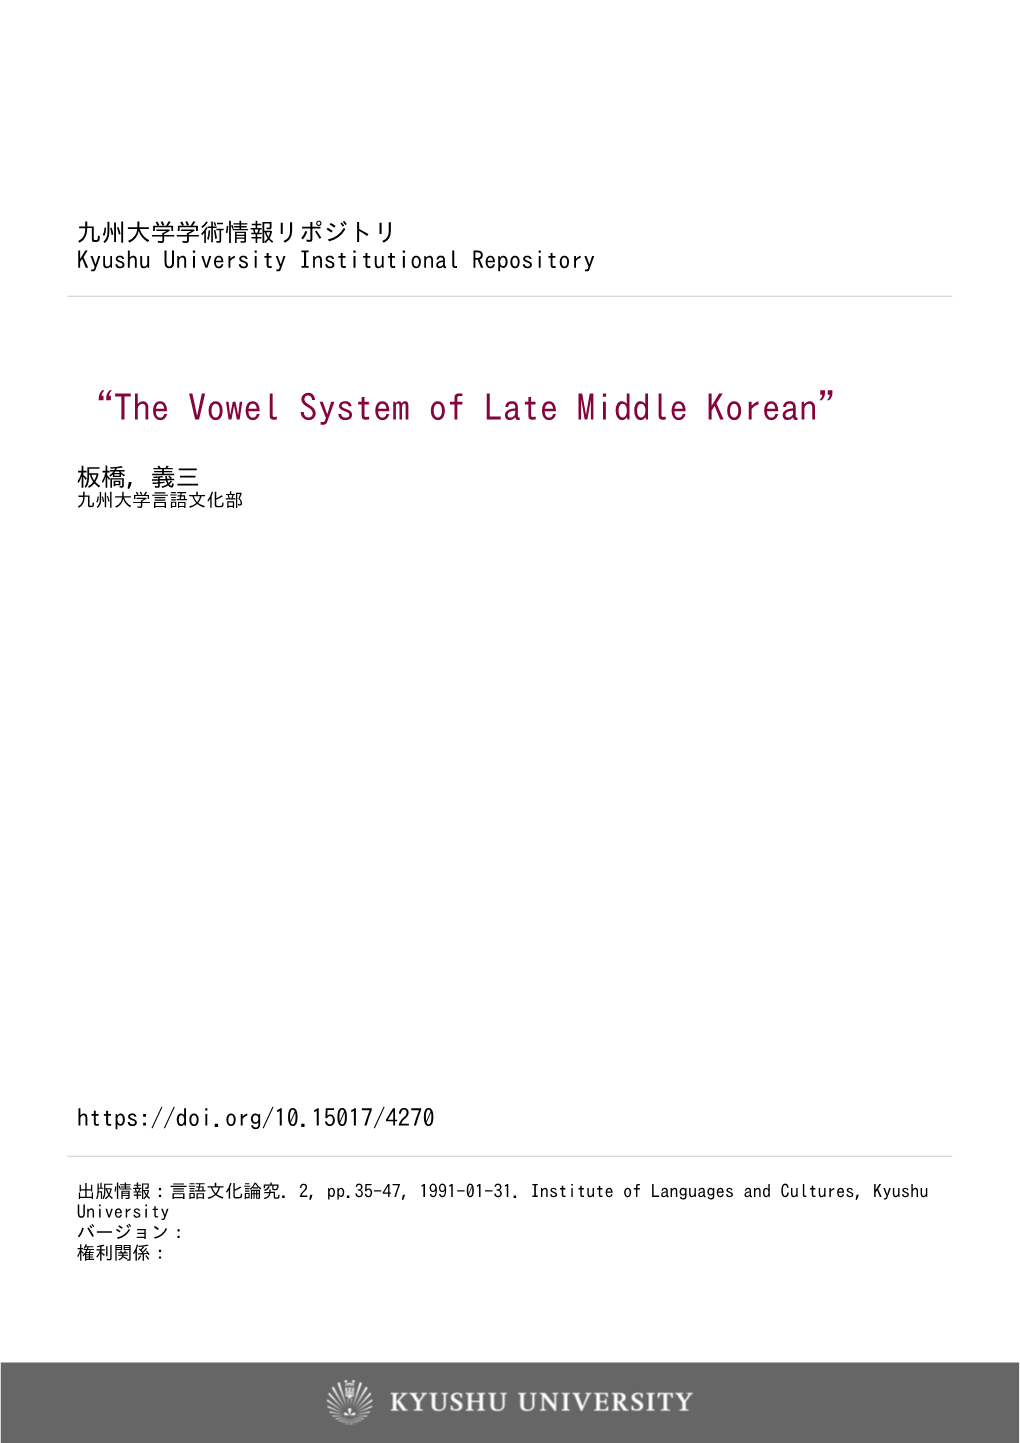 “The Vowel System of Late Middle Korean”